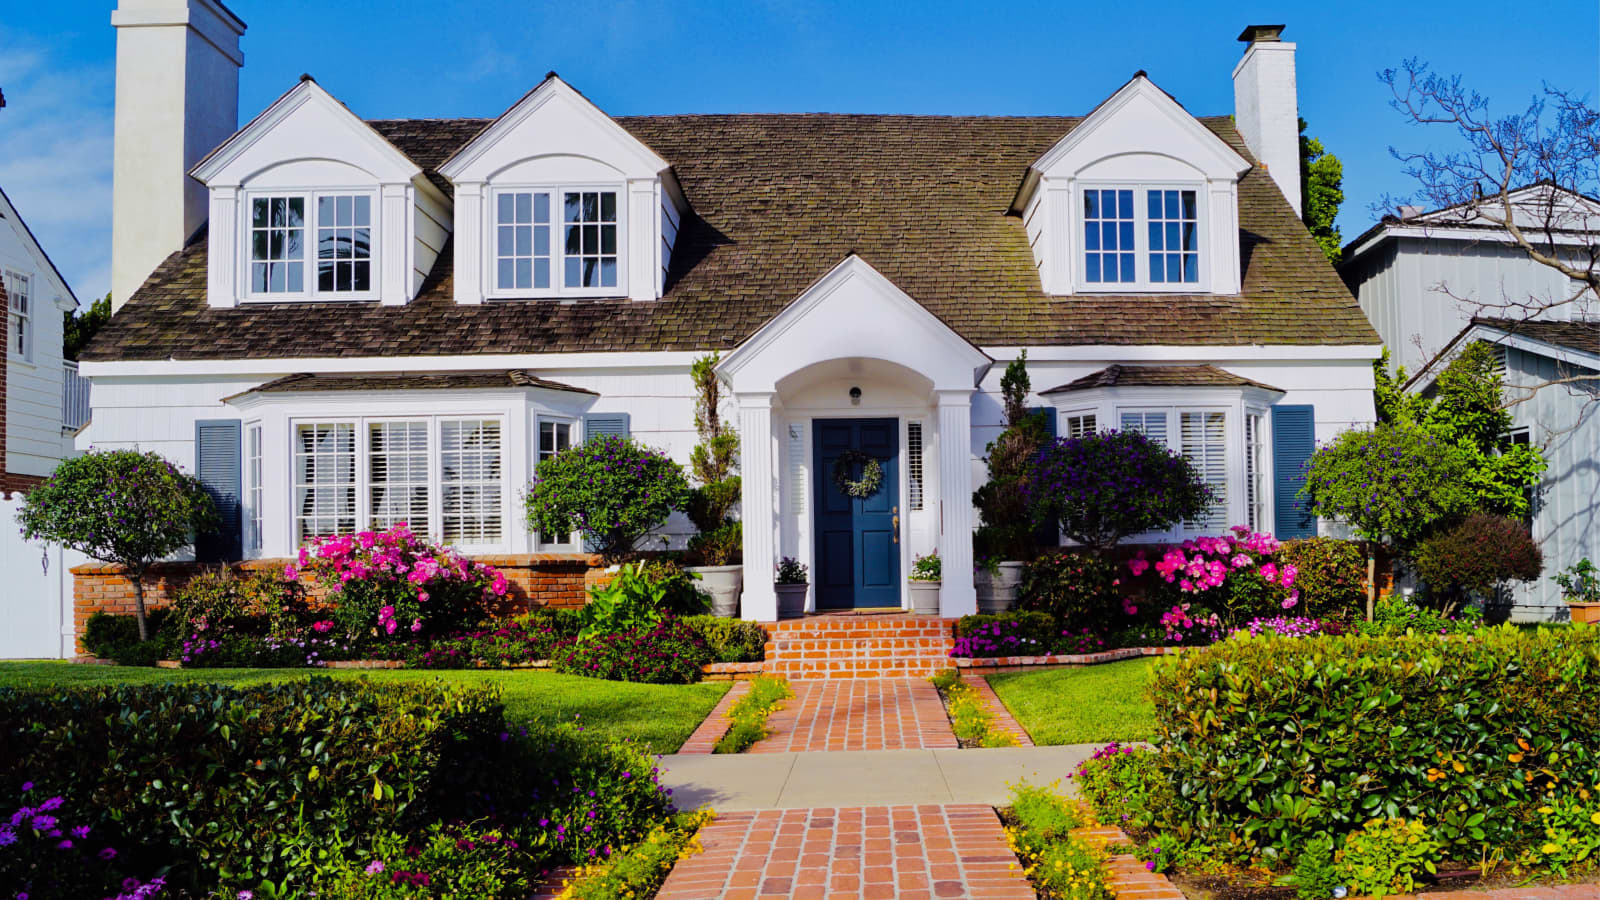 Can't find your dream home? Unlisted houses might be your answer